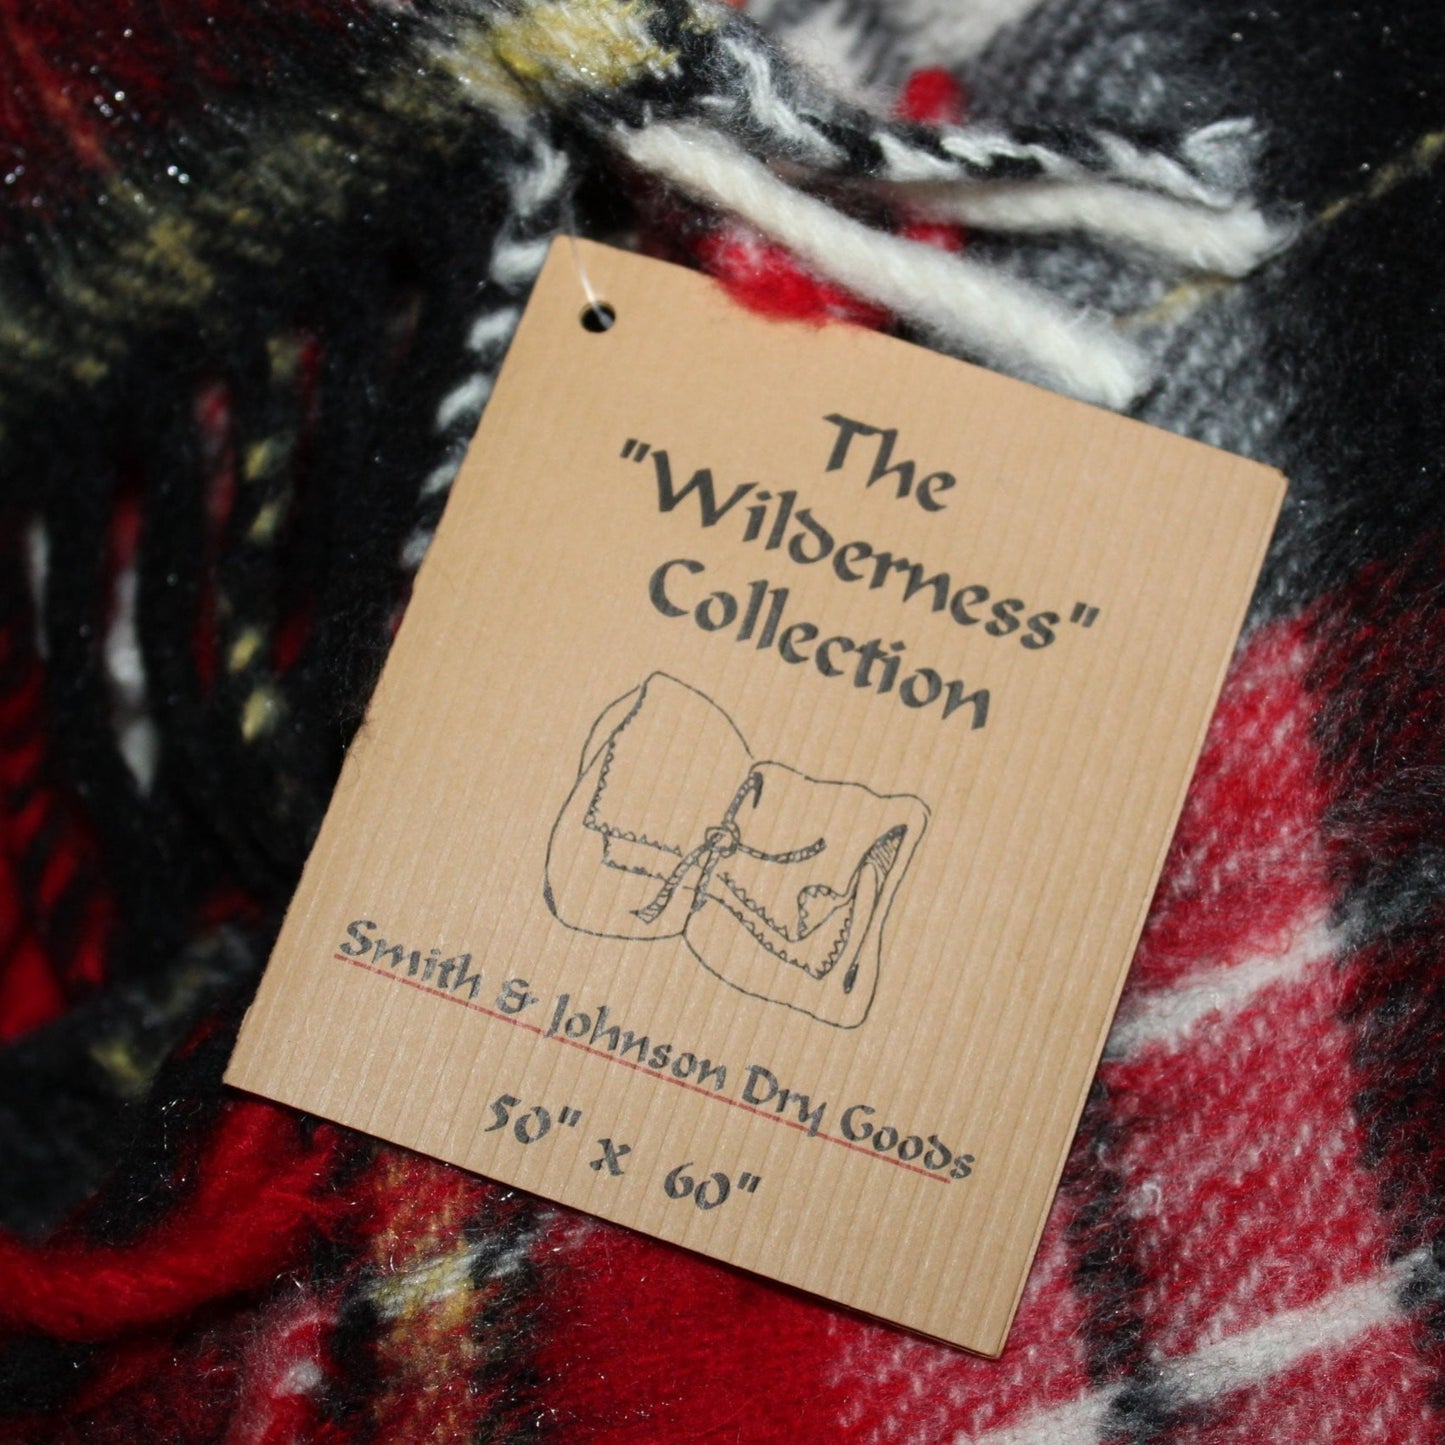 New Acrylic Throw Blanket Smith Johnson Dry Goods Red Plaid 50" X 60" Tag wilderness collection